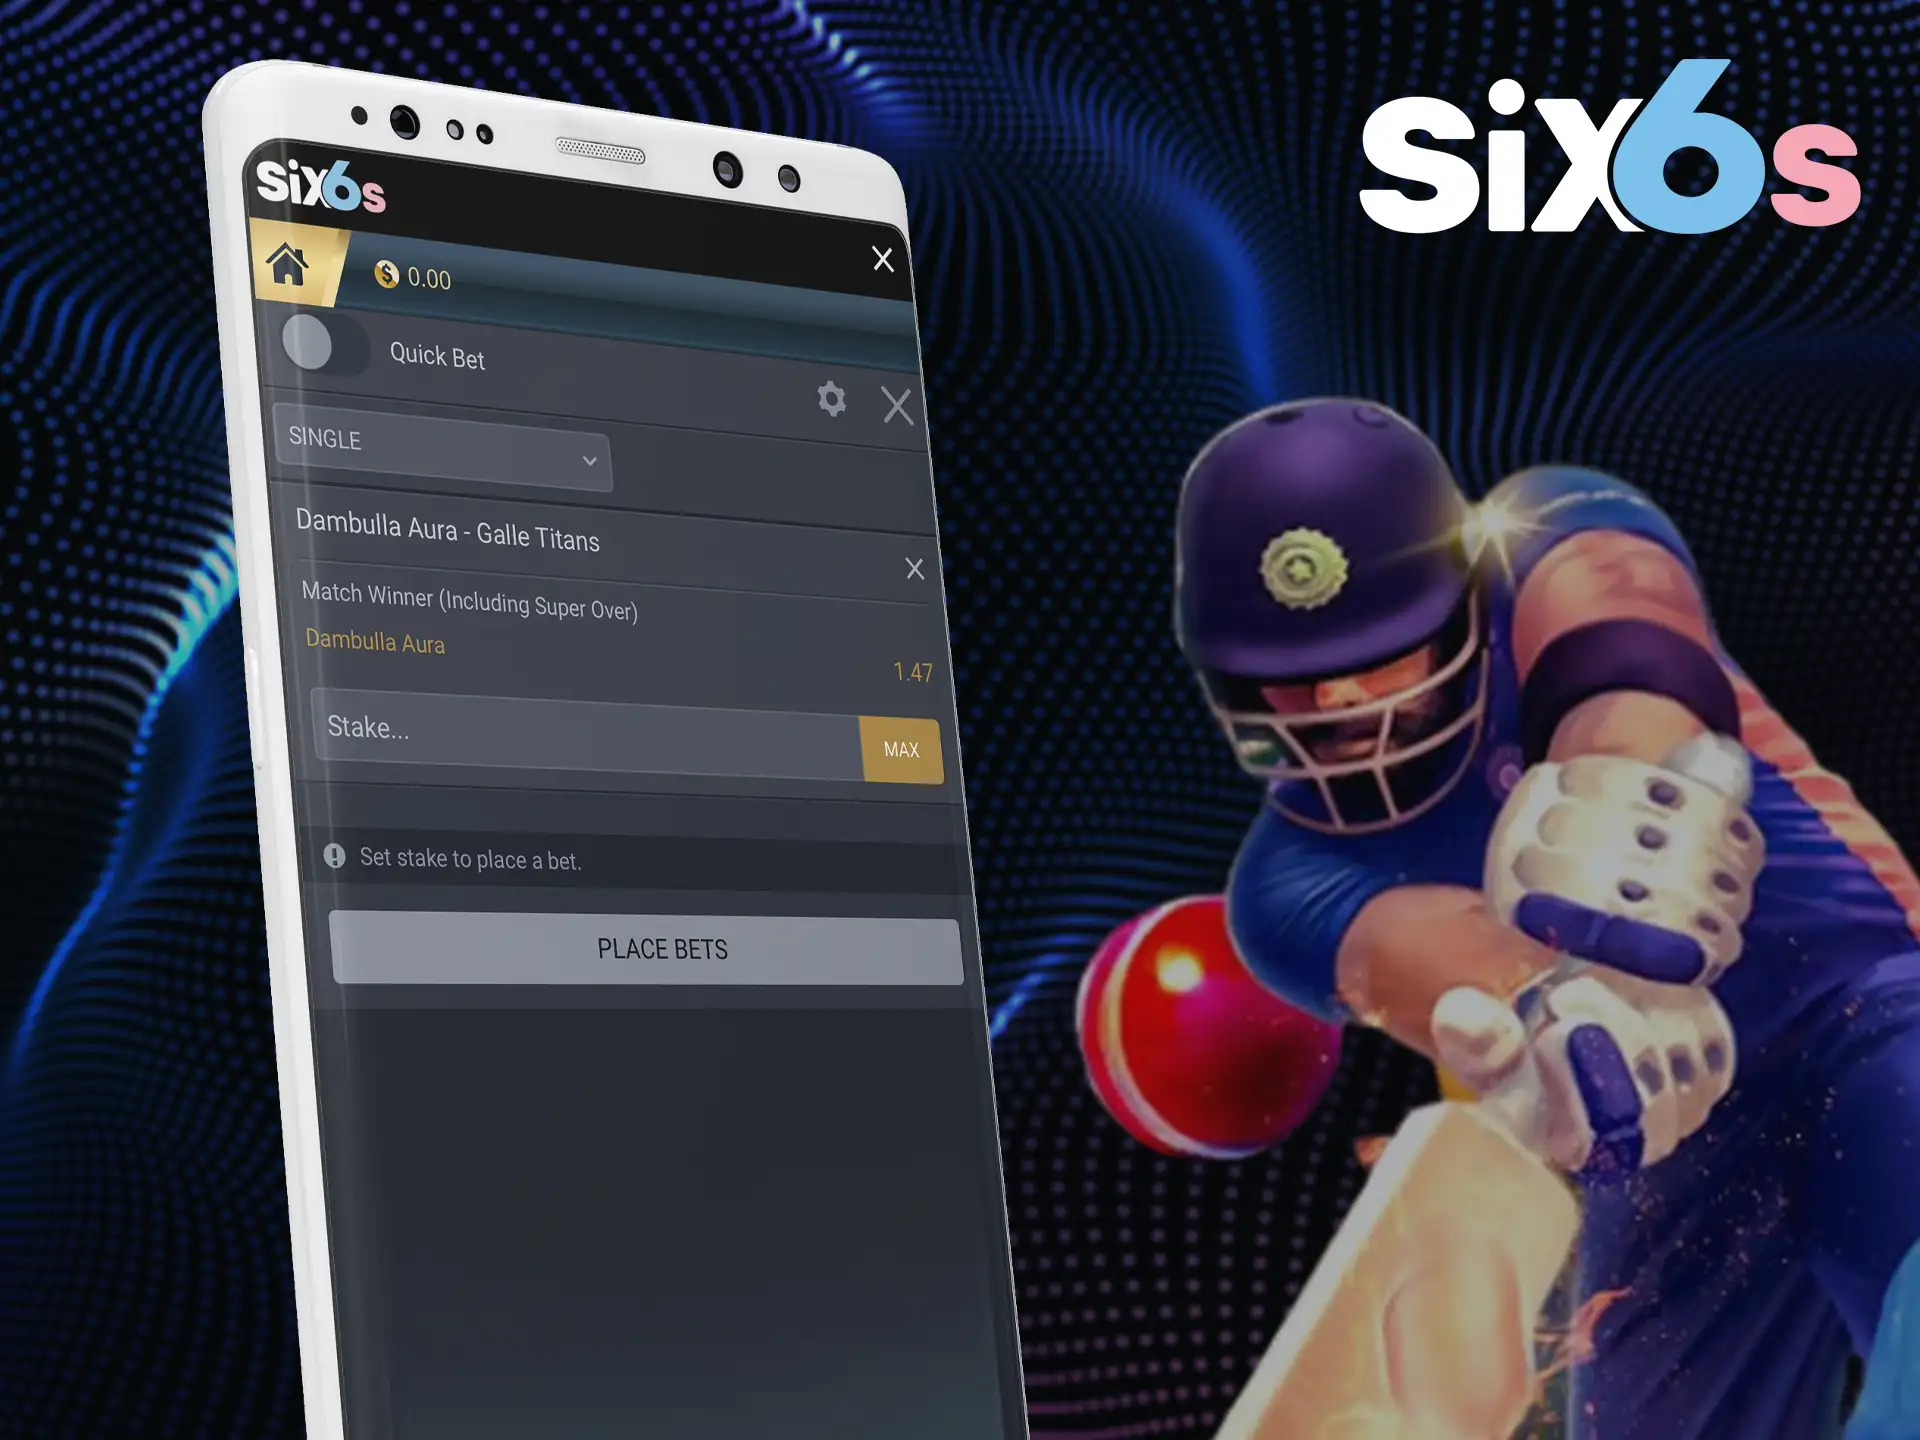 Minimize your risks and make single bets with Six6s.